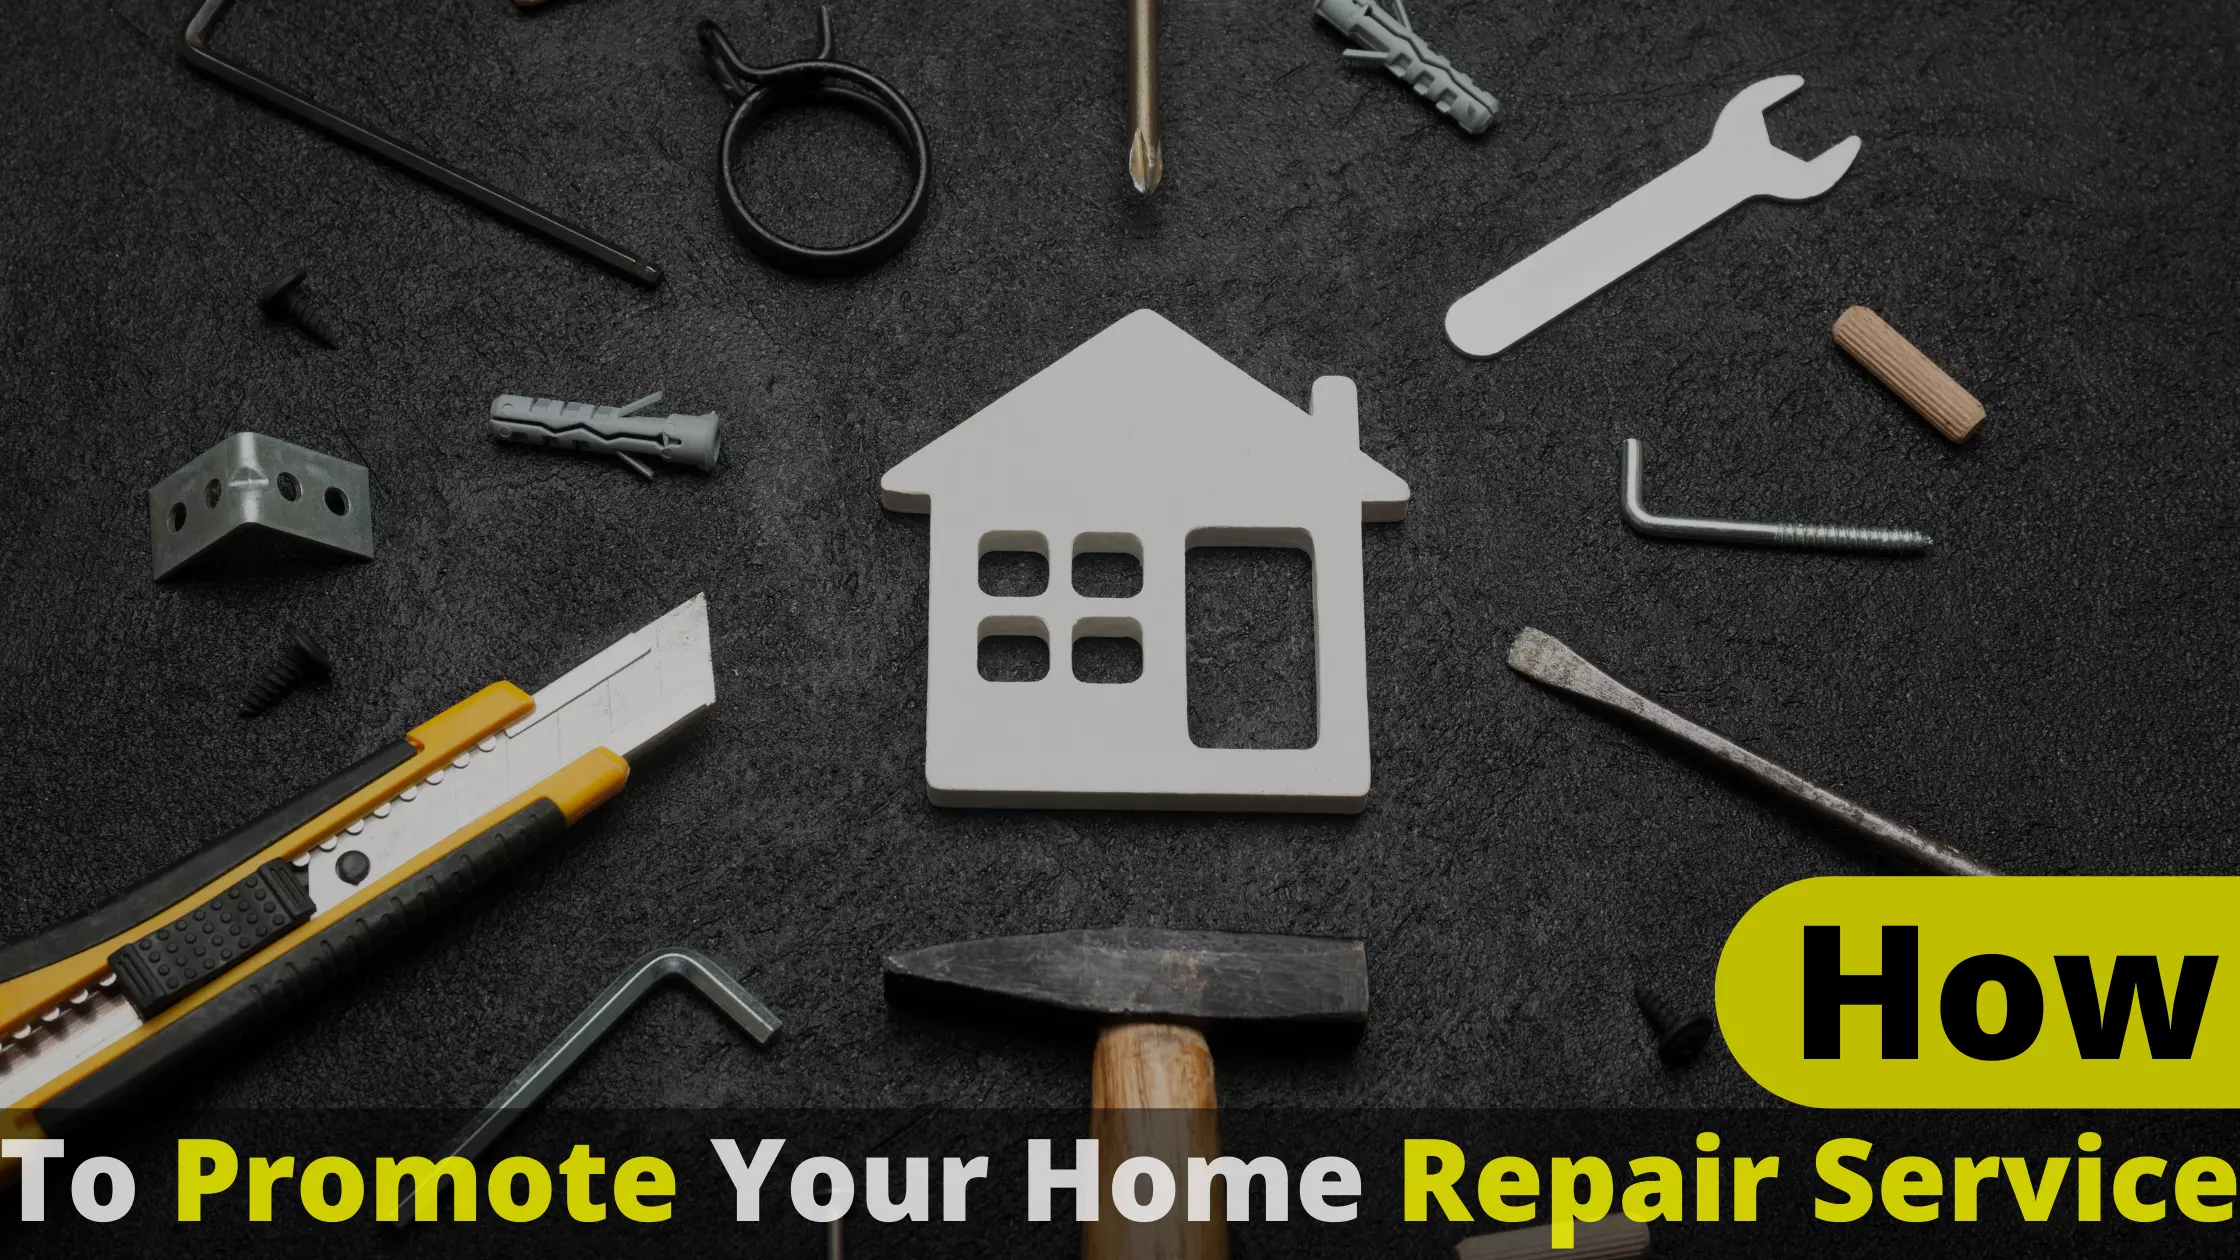 How to Promote your Home Repair Service in 2022